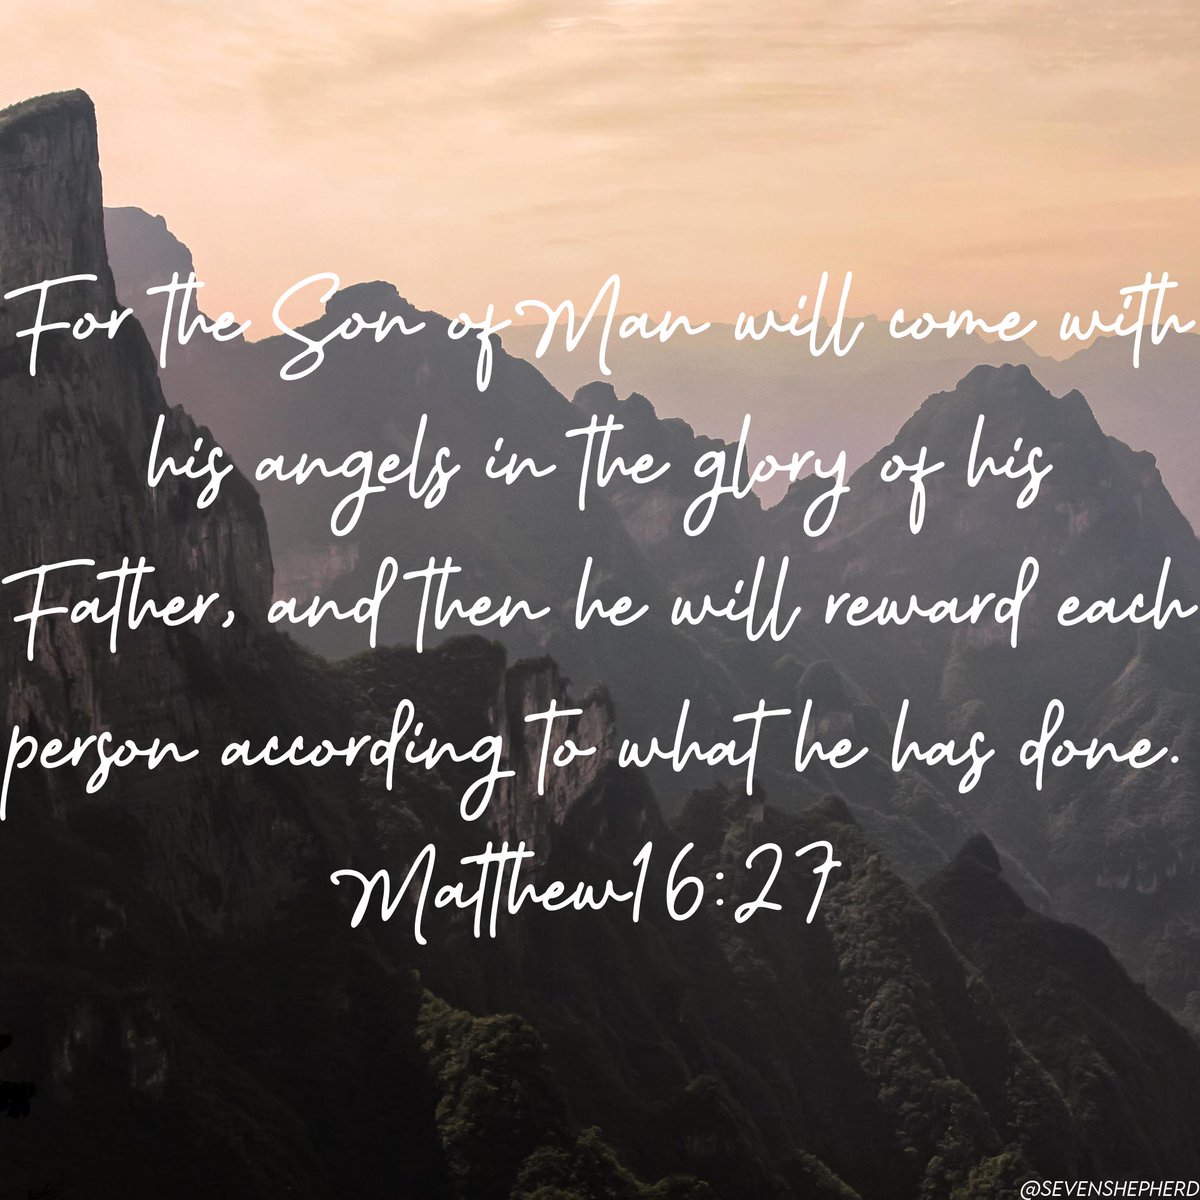 'For the Son of Man will come with his angels in the glory of his Father, and then he will reward each person according to what he has done.' — Matthew 16:27 NET #Jesus #God #Bible